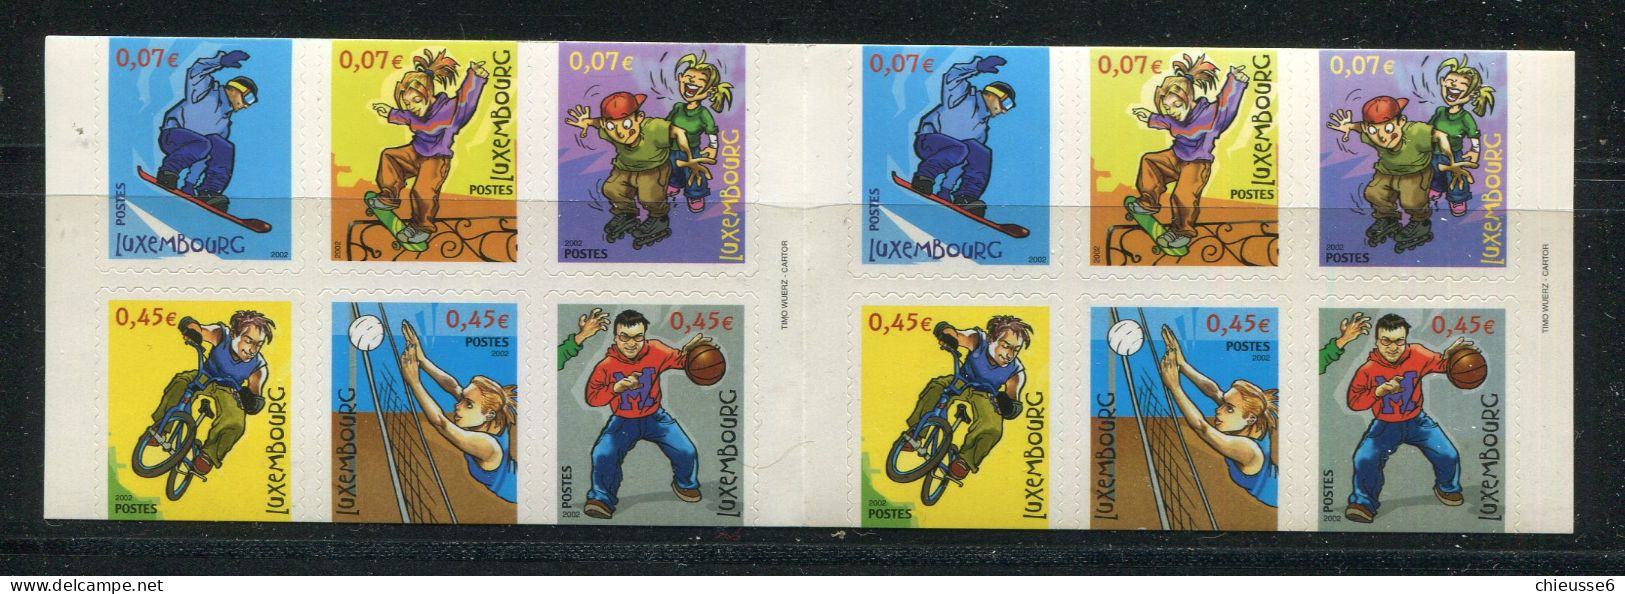 Luxembourg ** C1511 - Sports " FUN" - Booklets